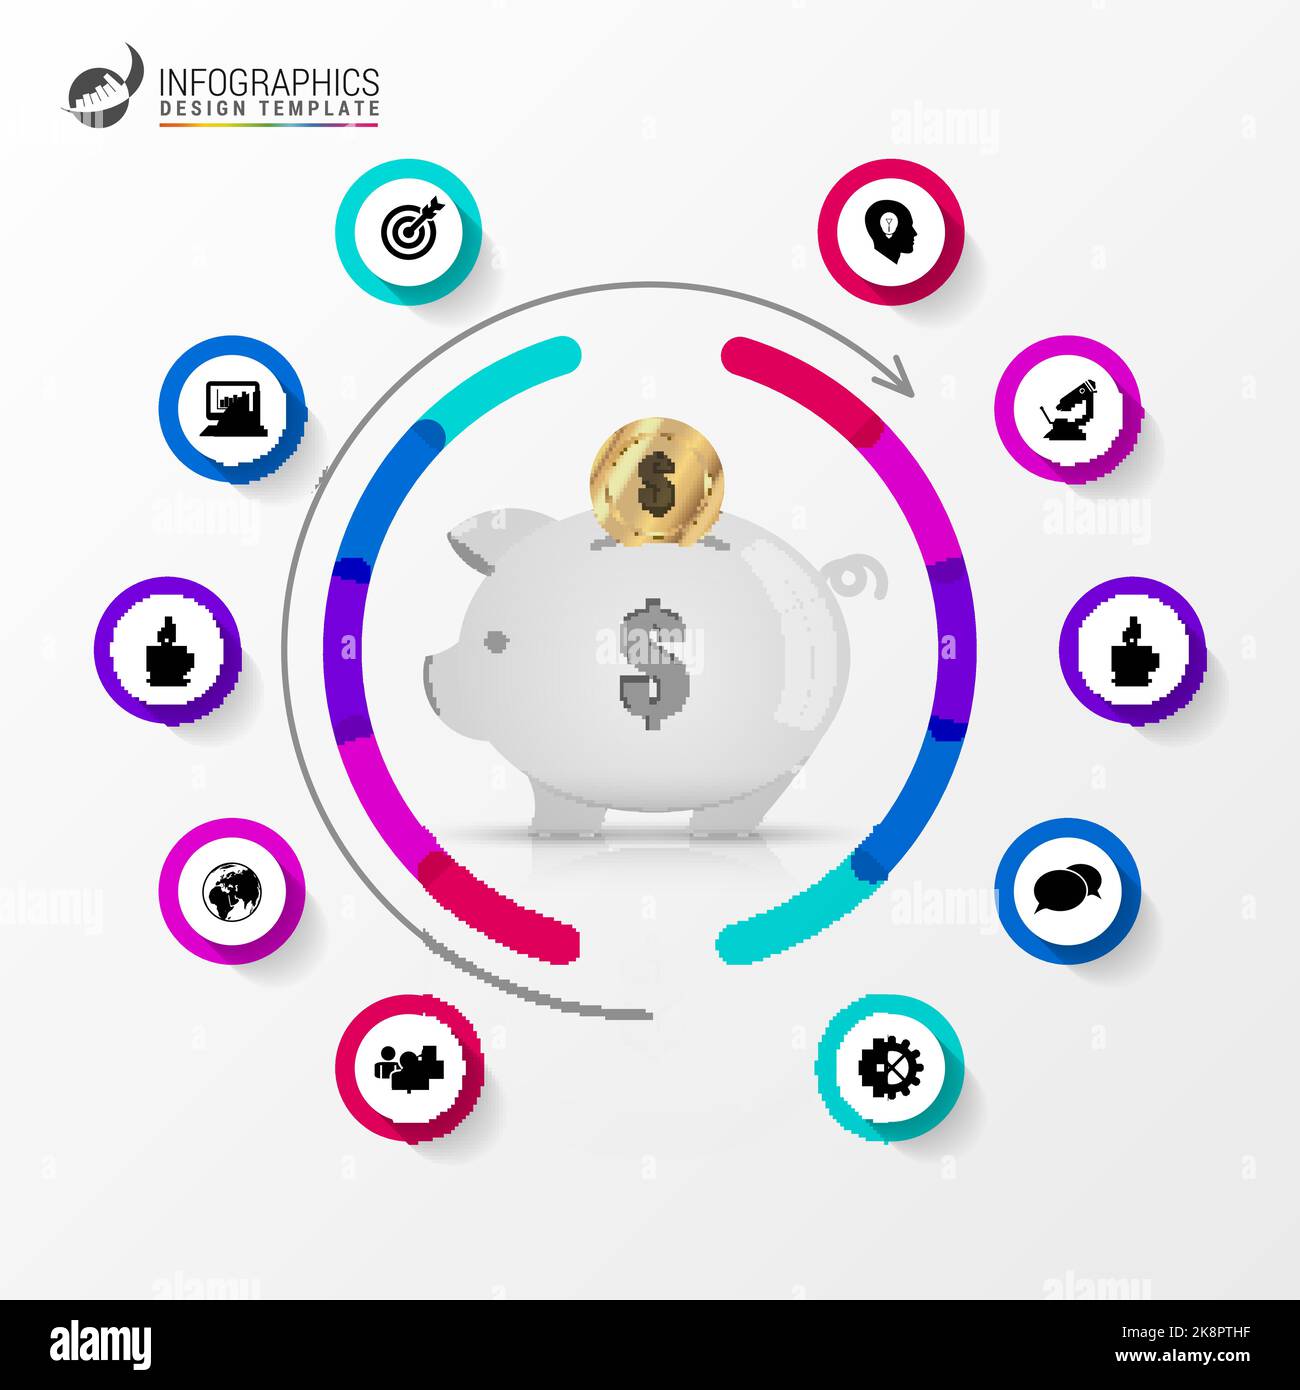 Infographic design template. Business concept with piggy bank. Vector illustration Stock Vector